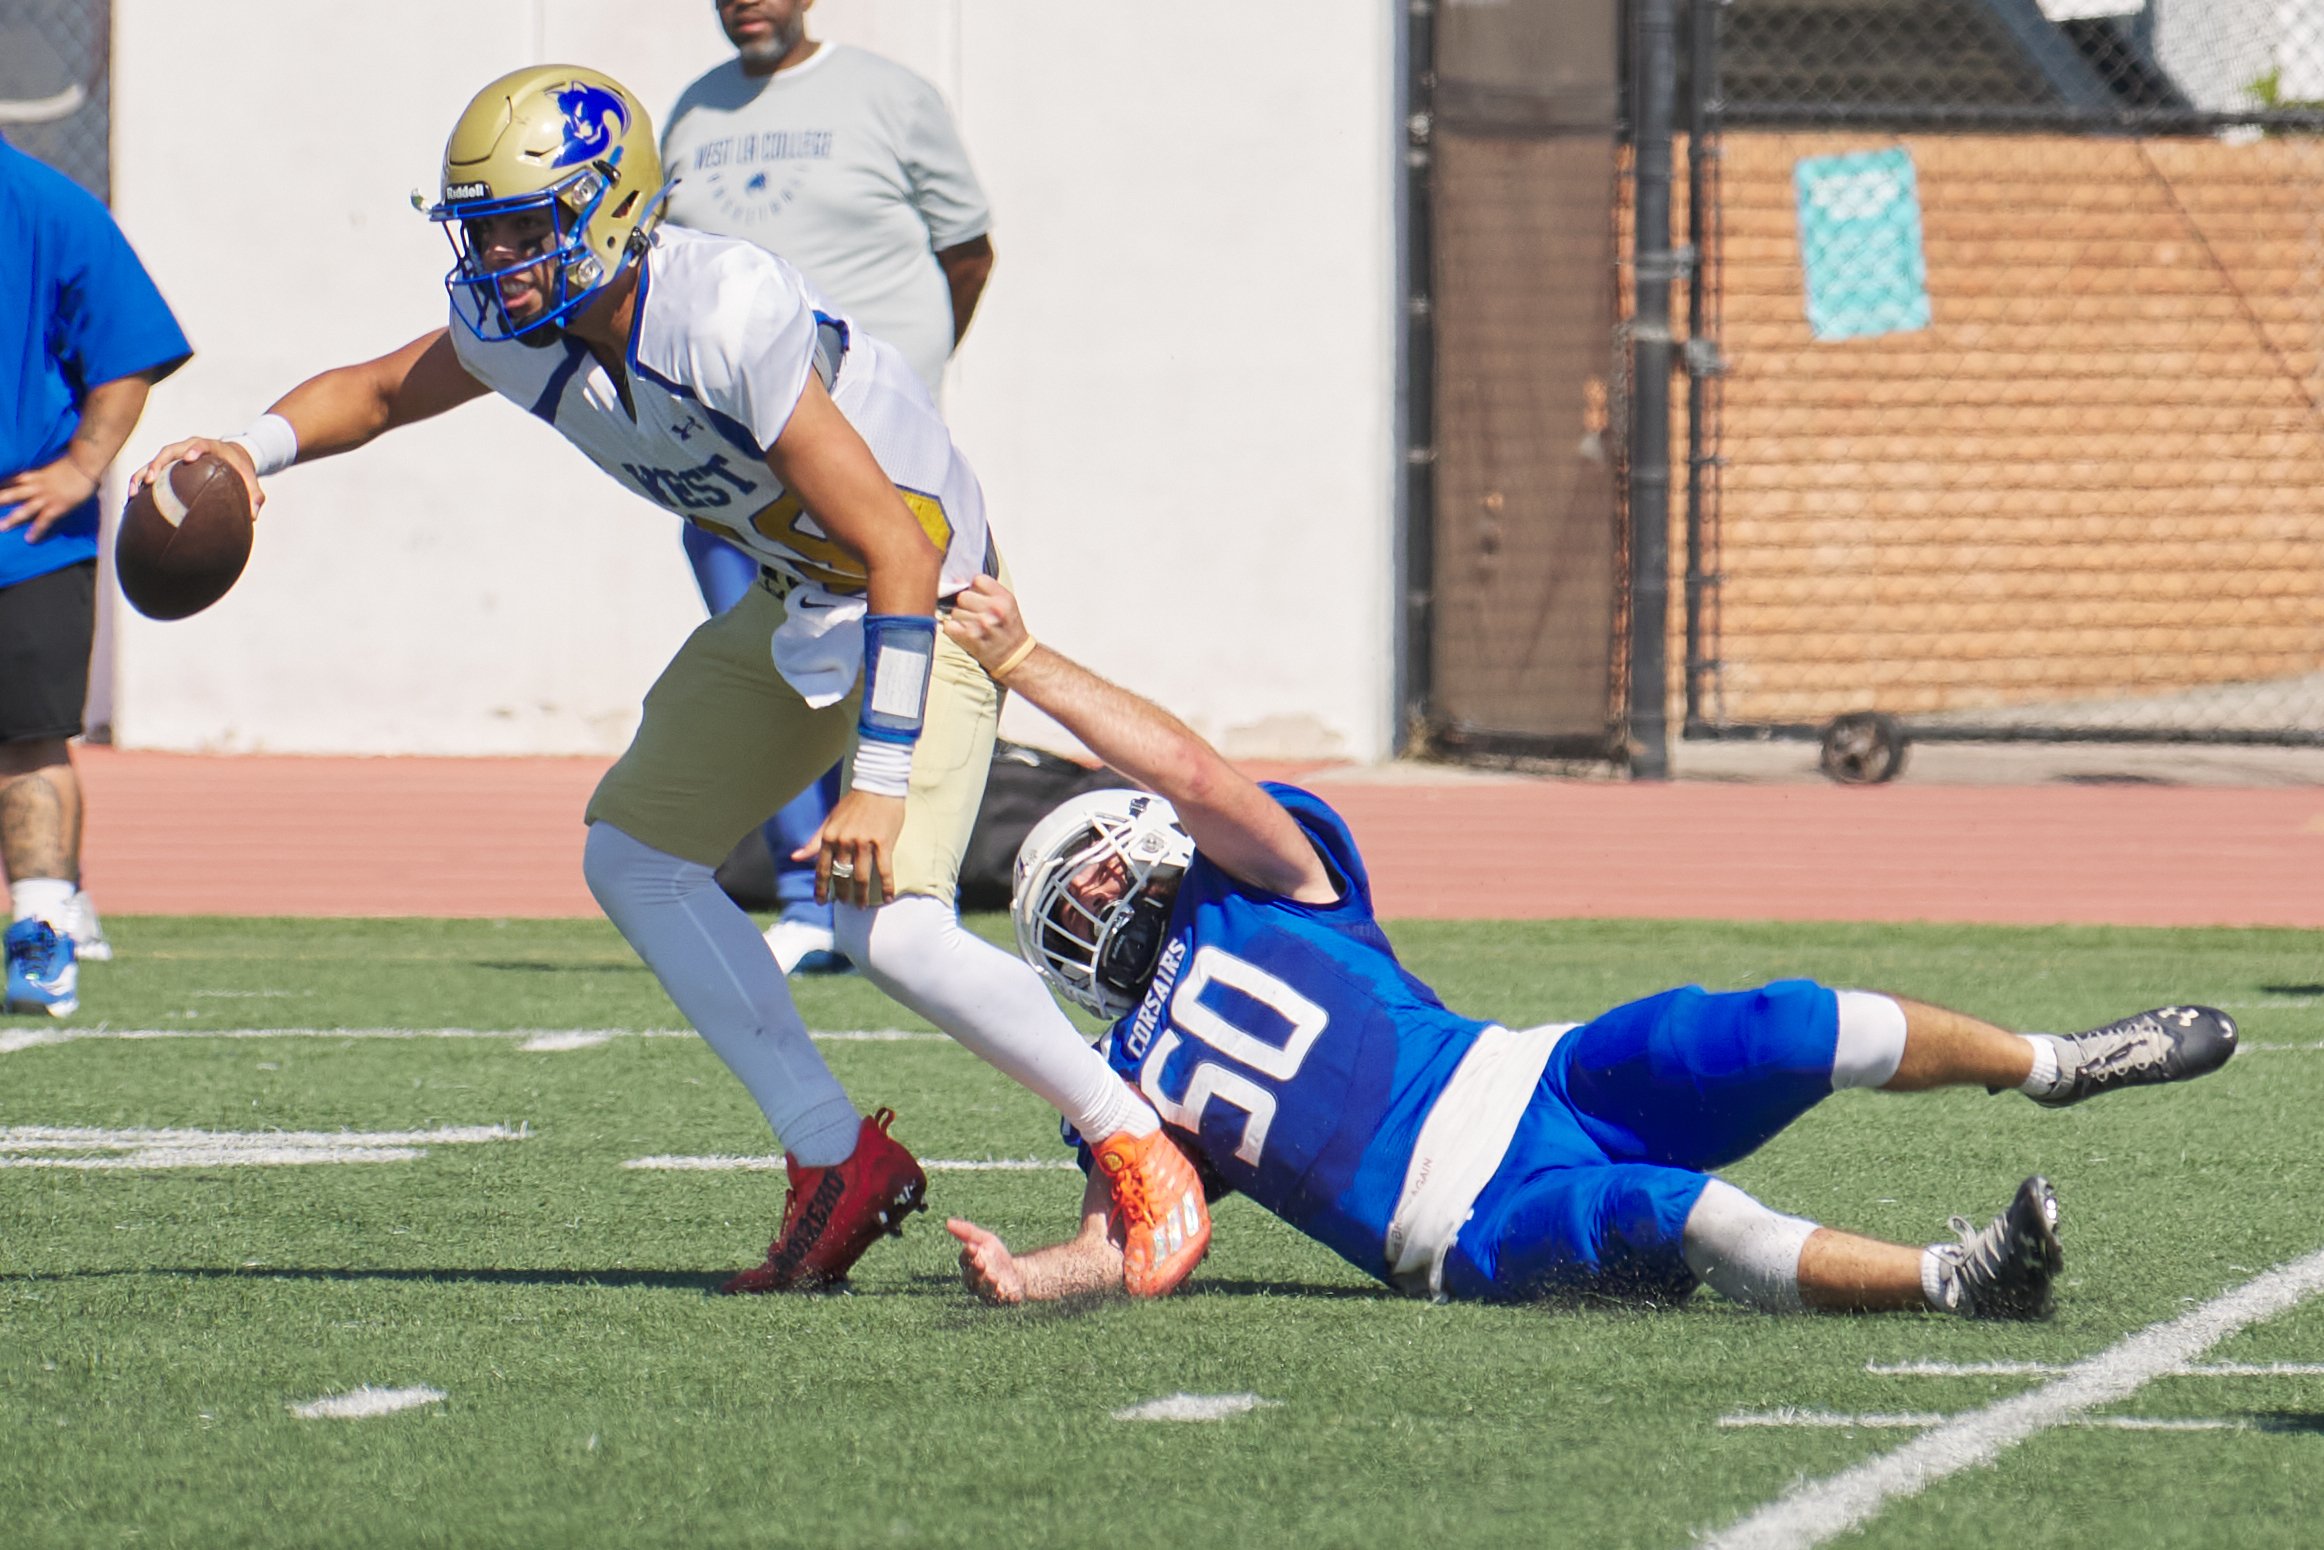  West Los Angeles College Wildcats' David Oliveros and Santa Monica College Corsairs' Kylan Keeler during the football match on Saturday, October 1, 2022, at Corsair Field in Santa Monica, Calif. The Corsairs won 41-40. (Nicholas McCall | The Corsair